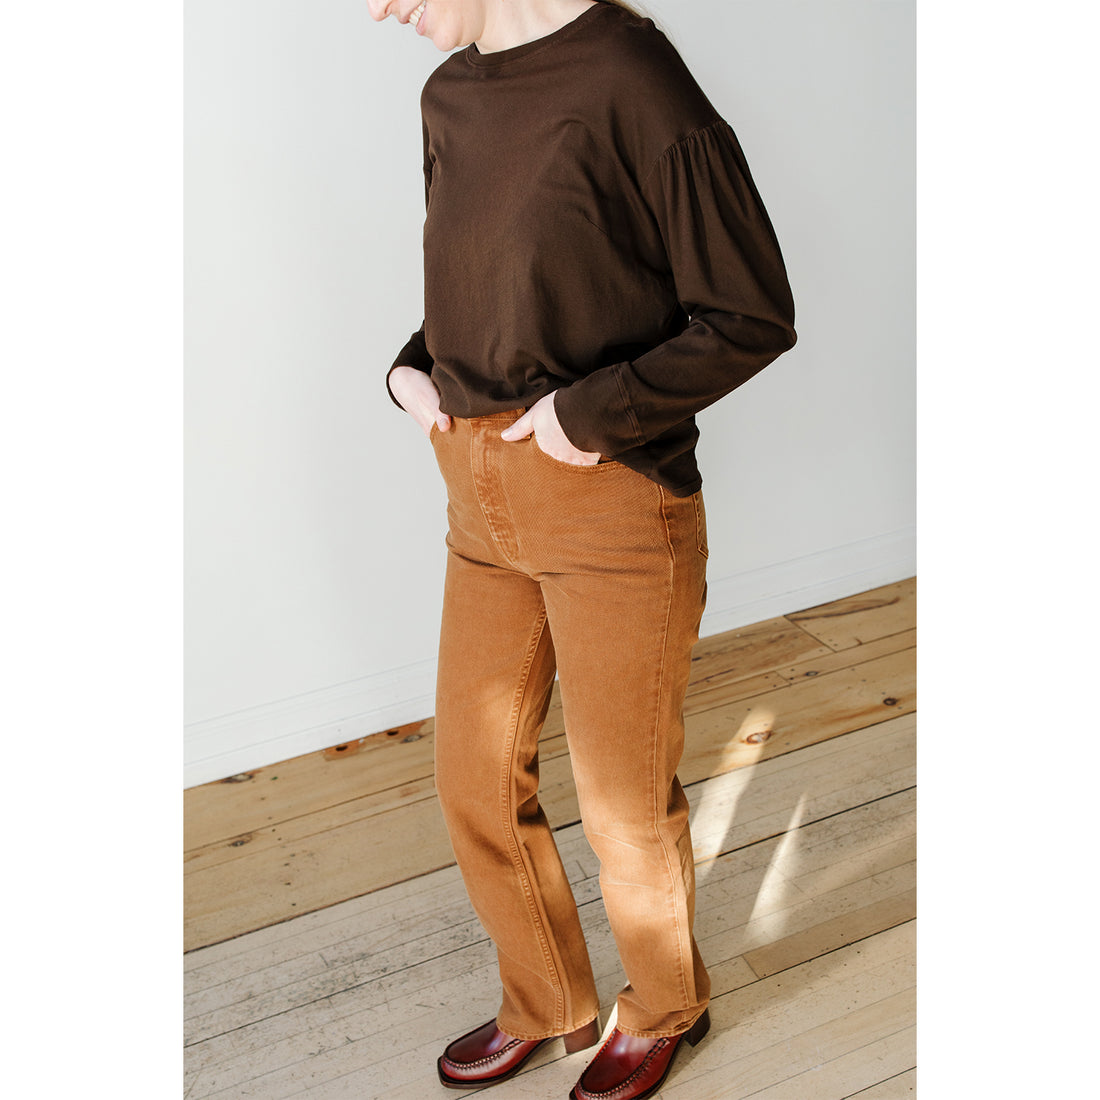 Ulla Johnson The Agnes Jean in Umber Wash